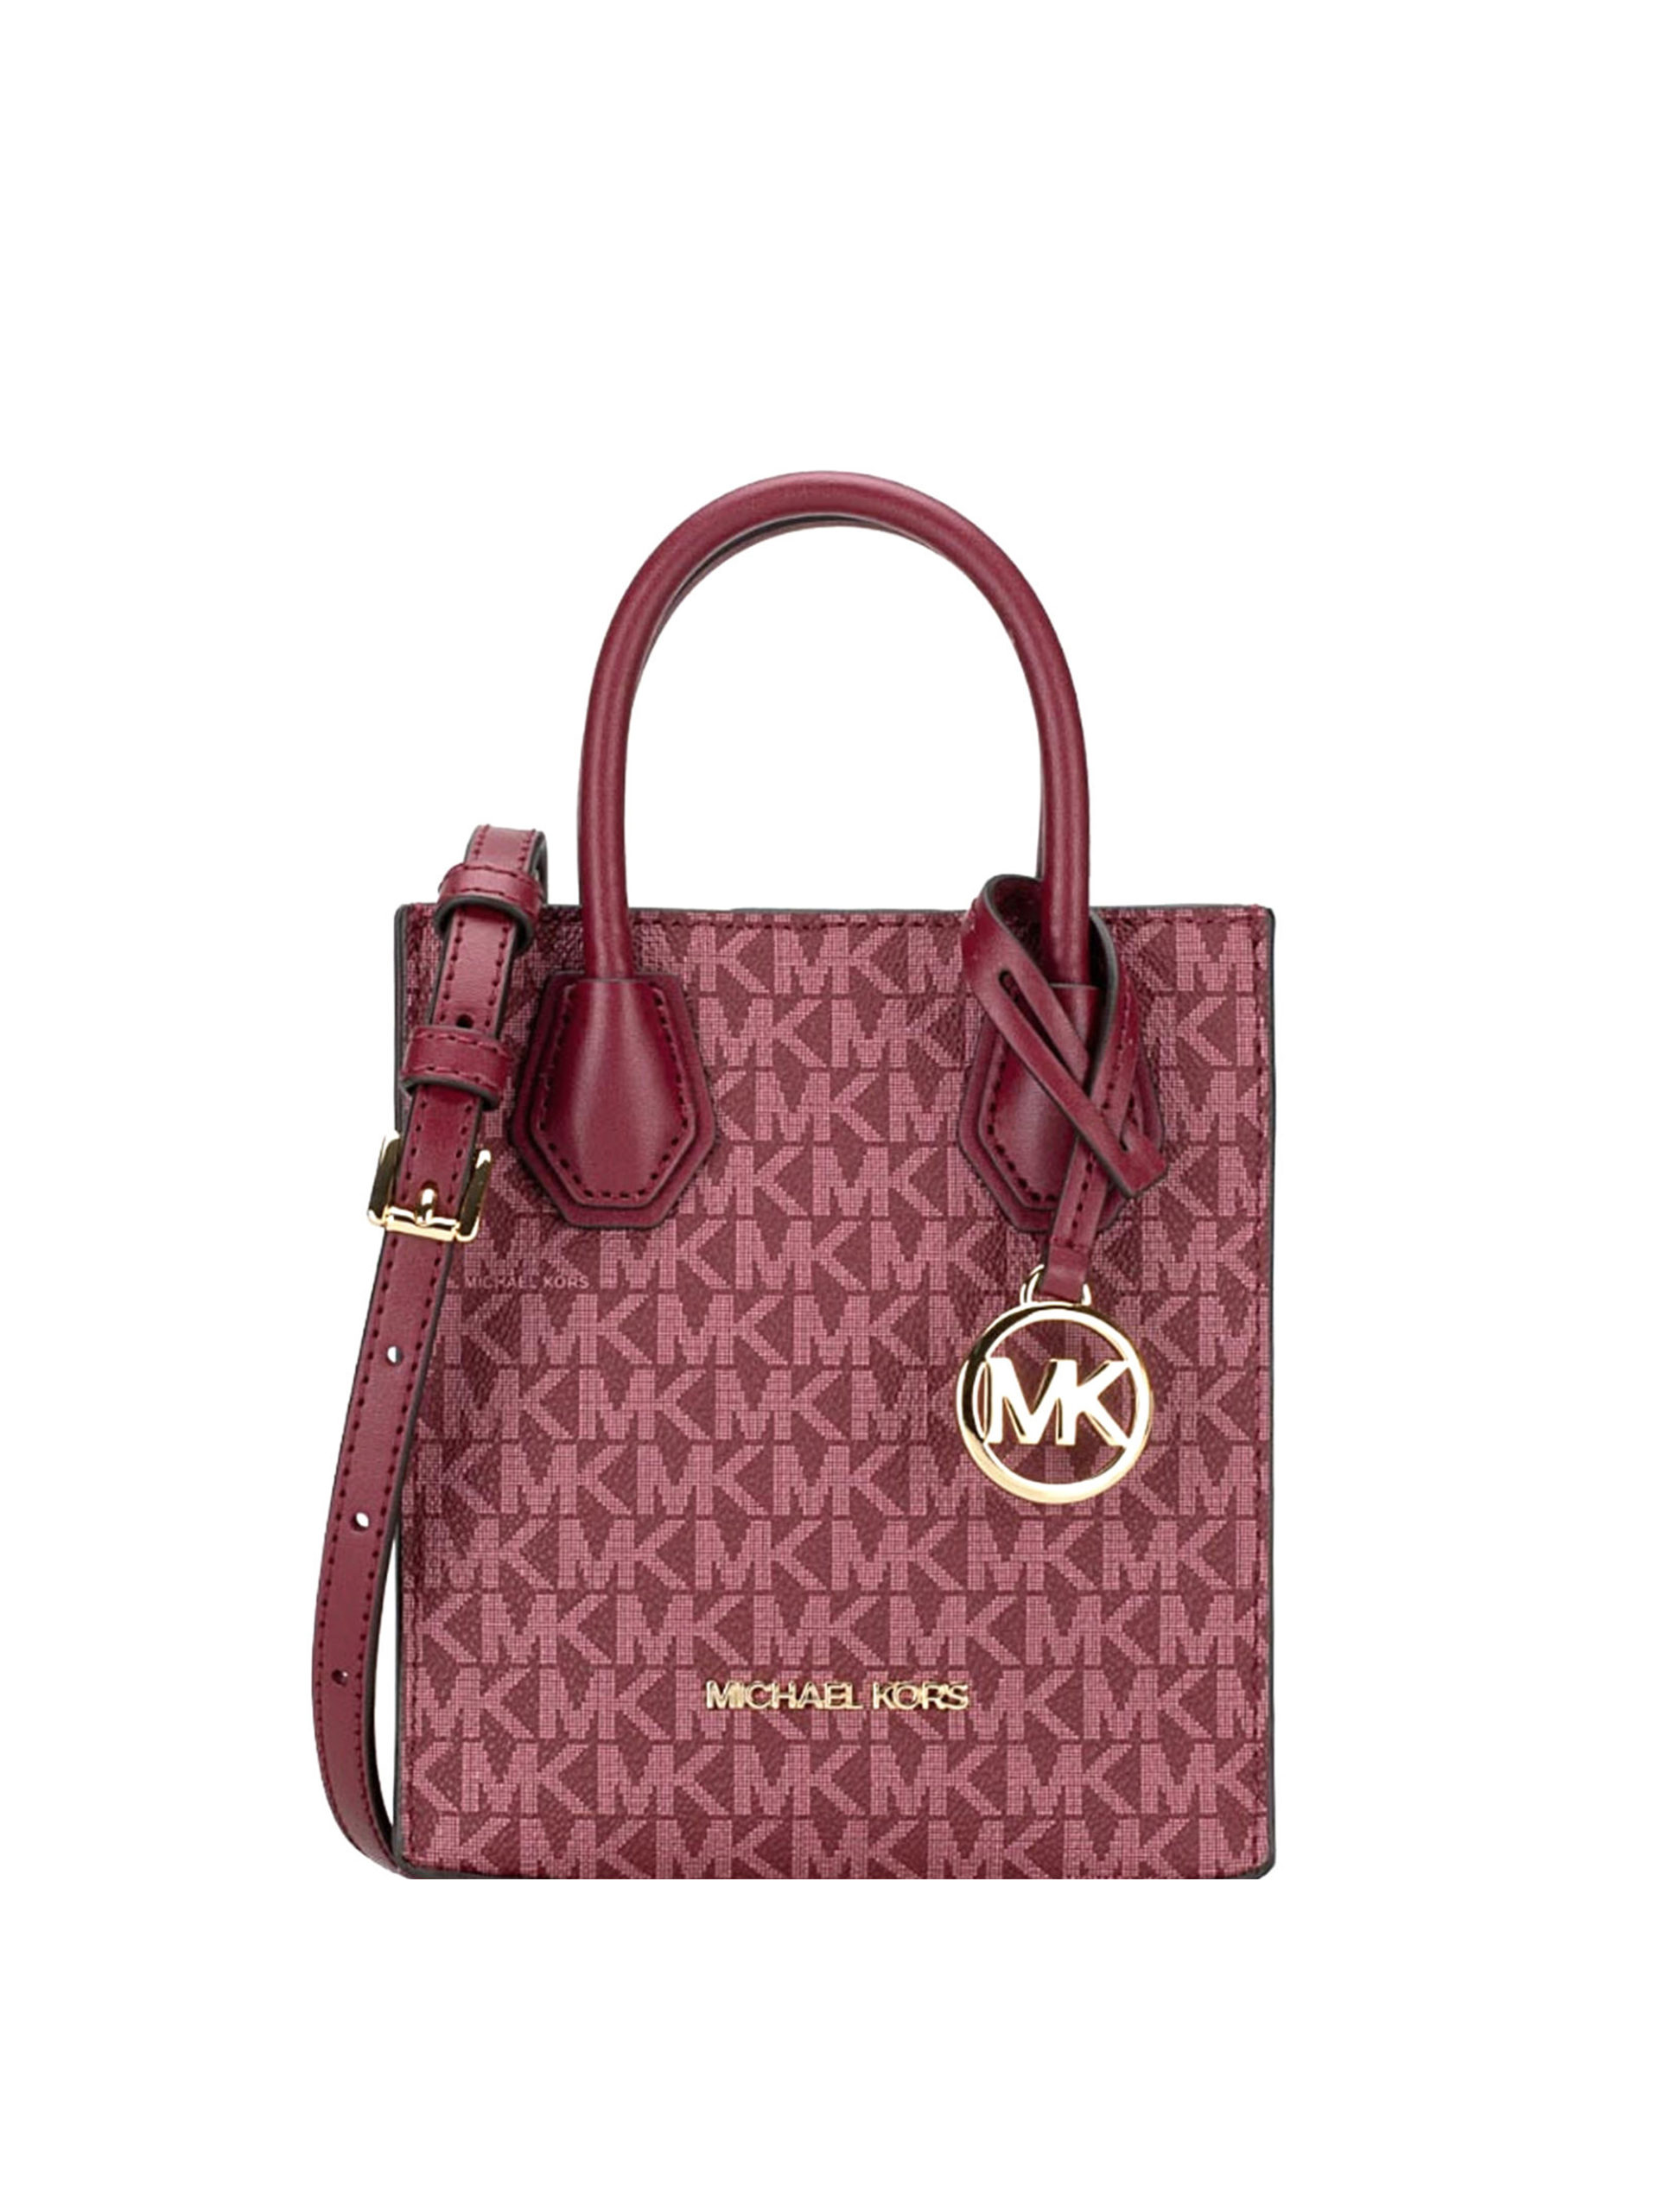  Michael Kors Mercer Large Convertible Tote Crossbody Mulberry  MK Signature : Clothing, Shoes & Jewelry